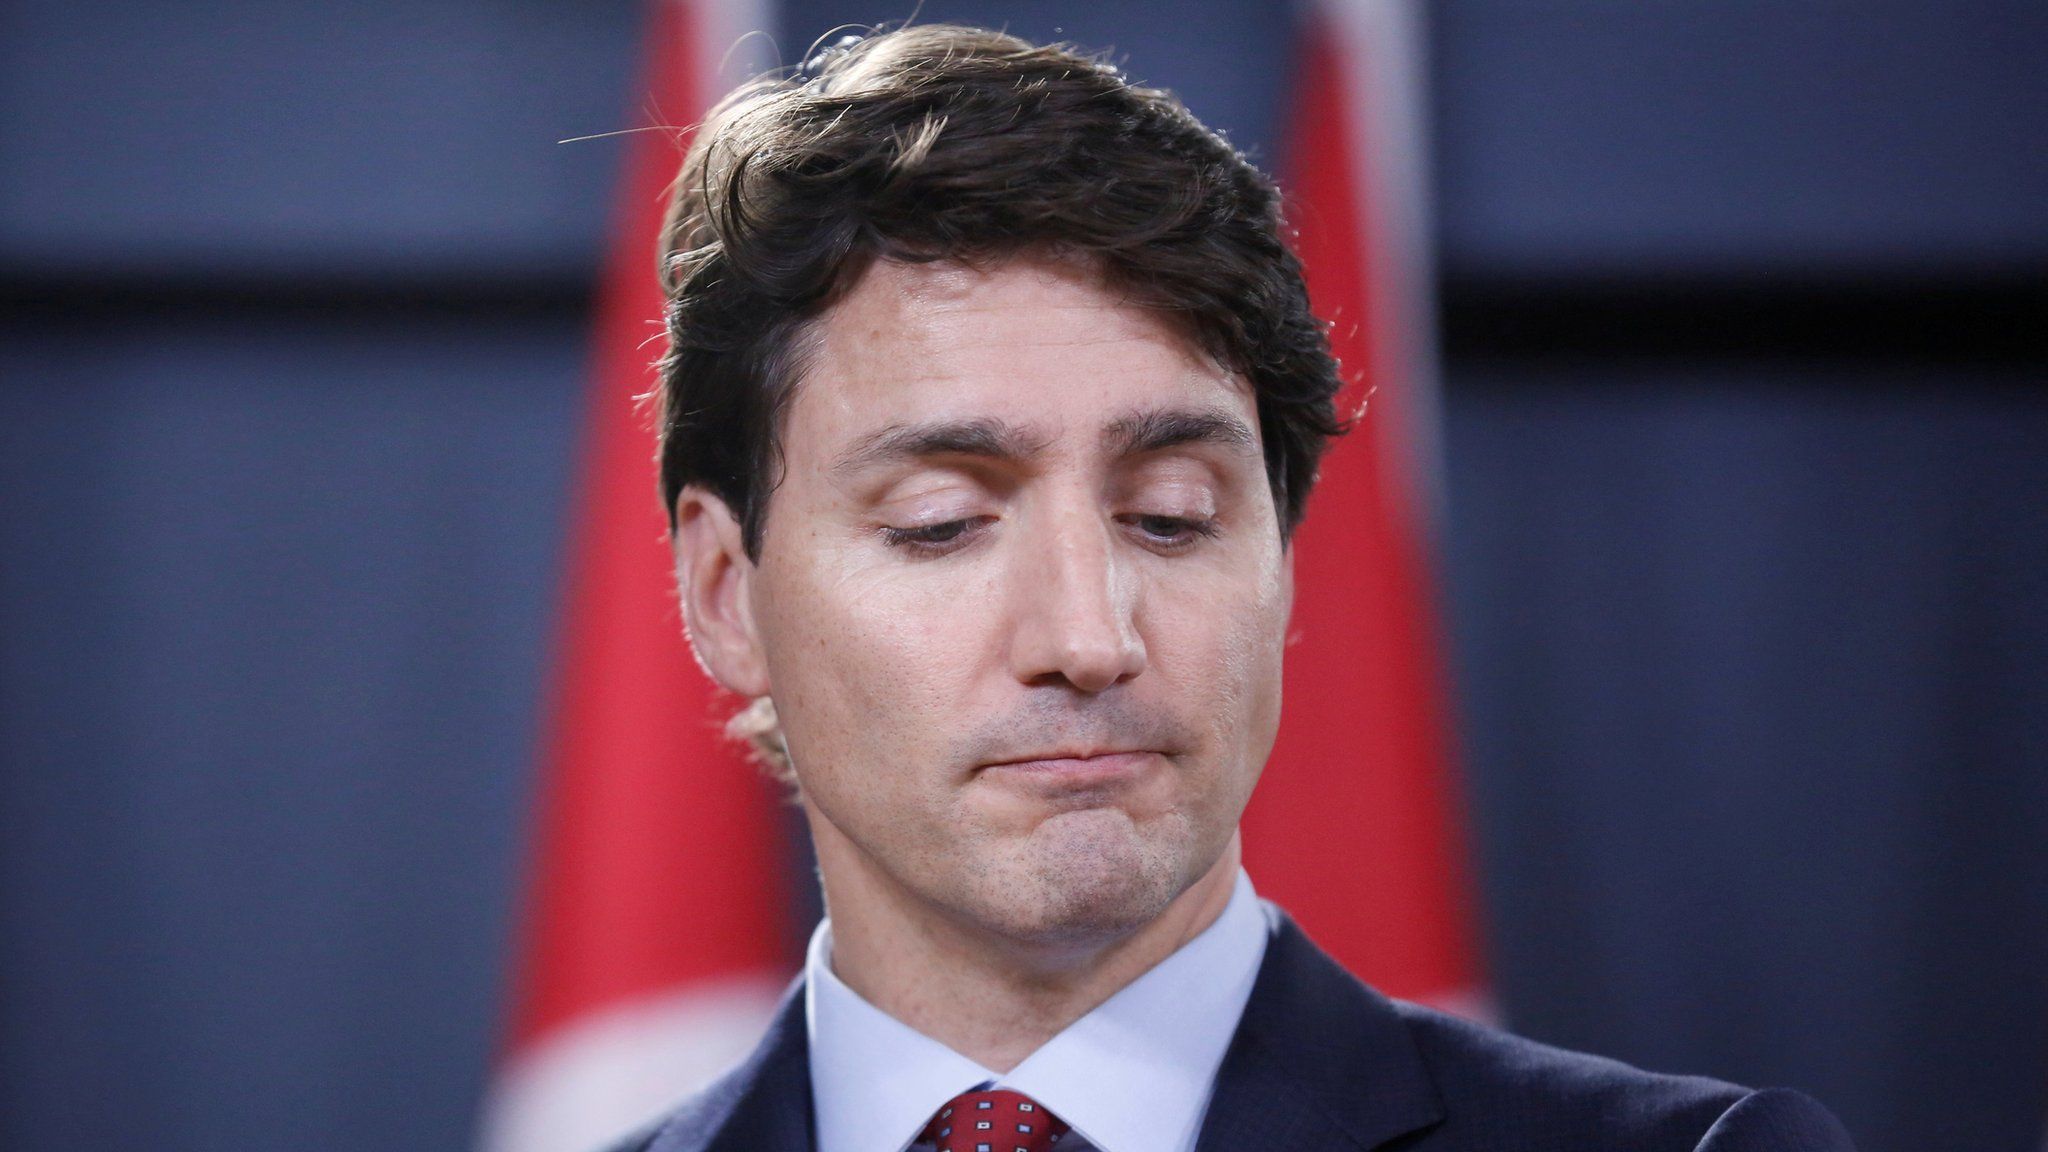 Canadian PM Justin Trudeau at a press conference May 2018